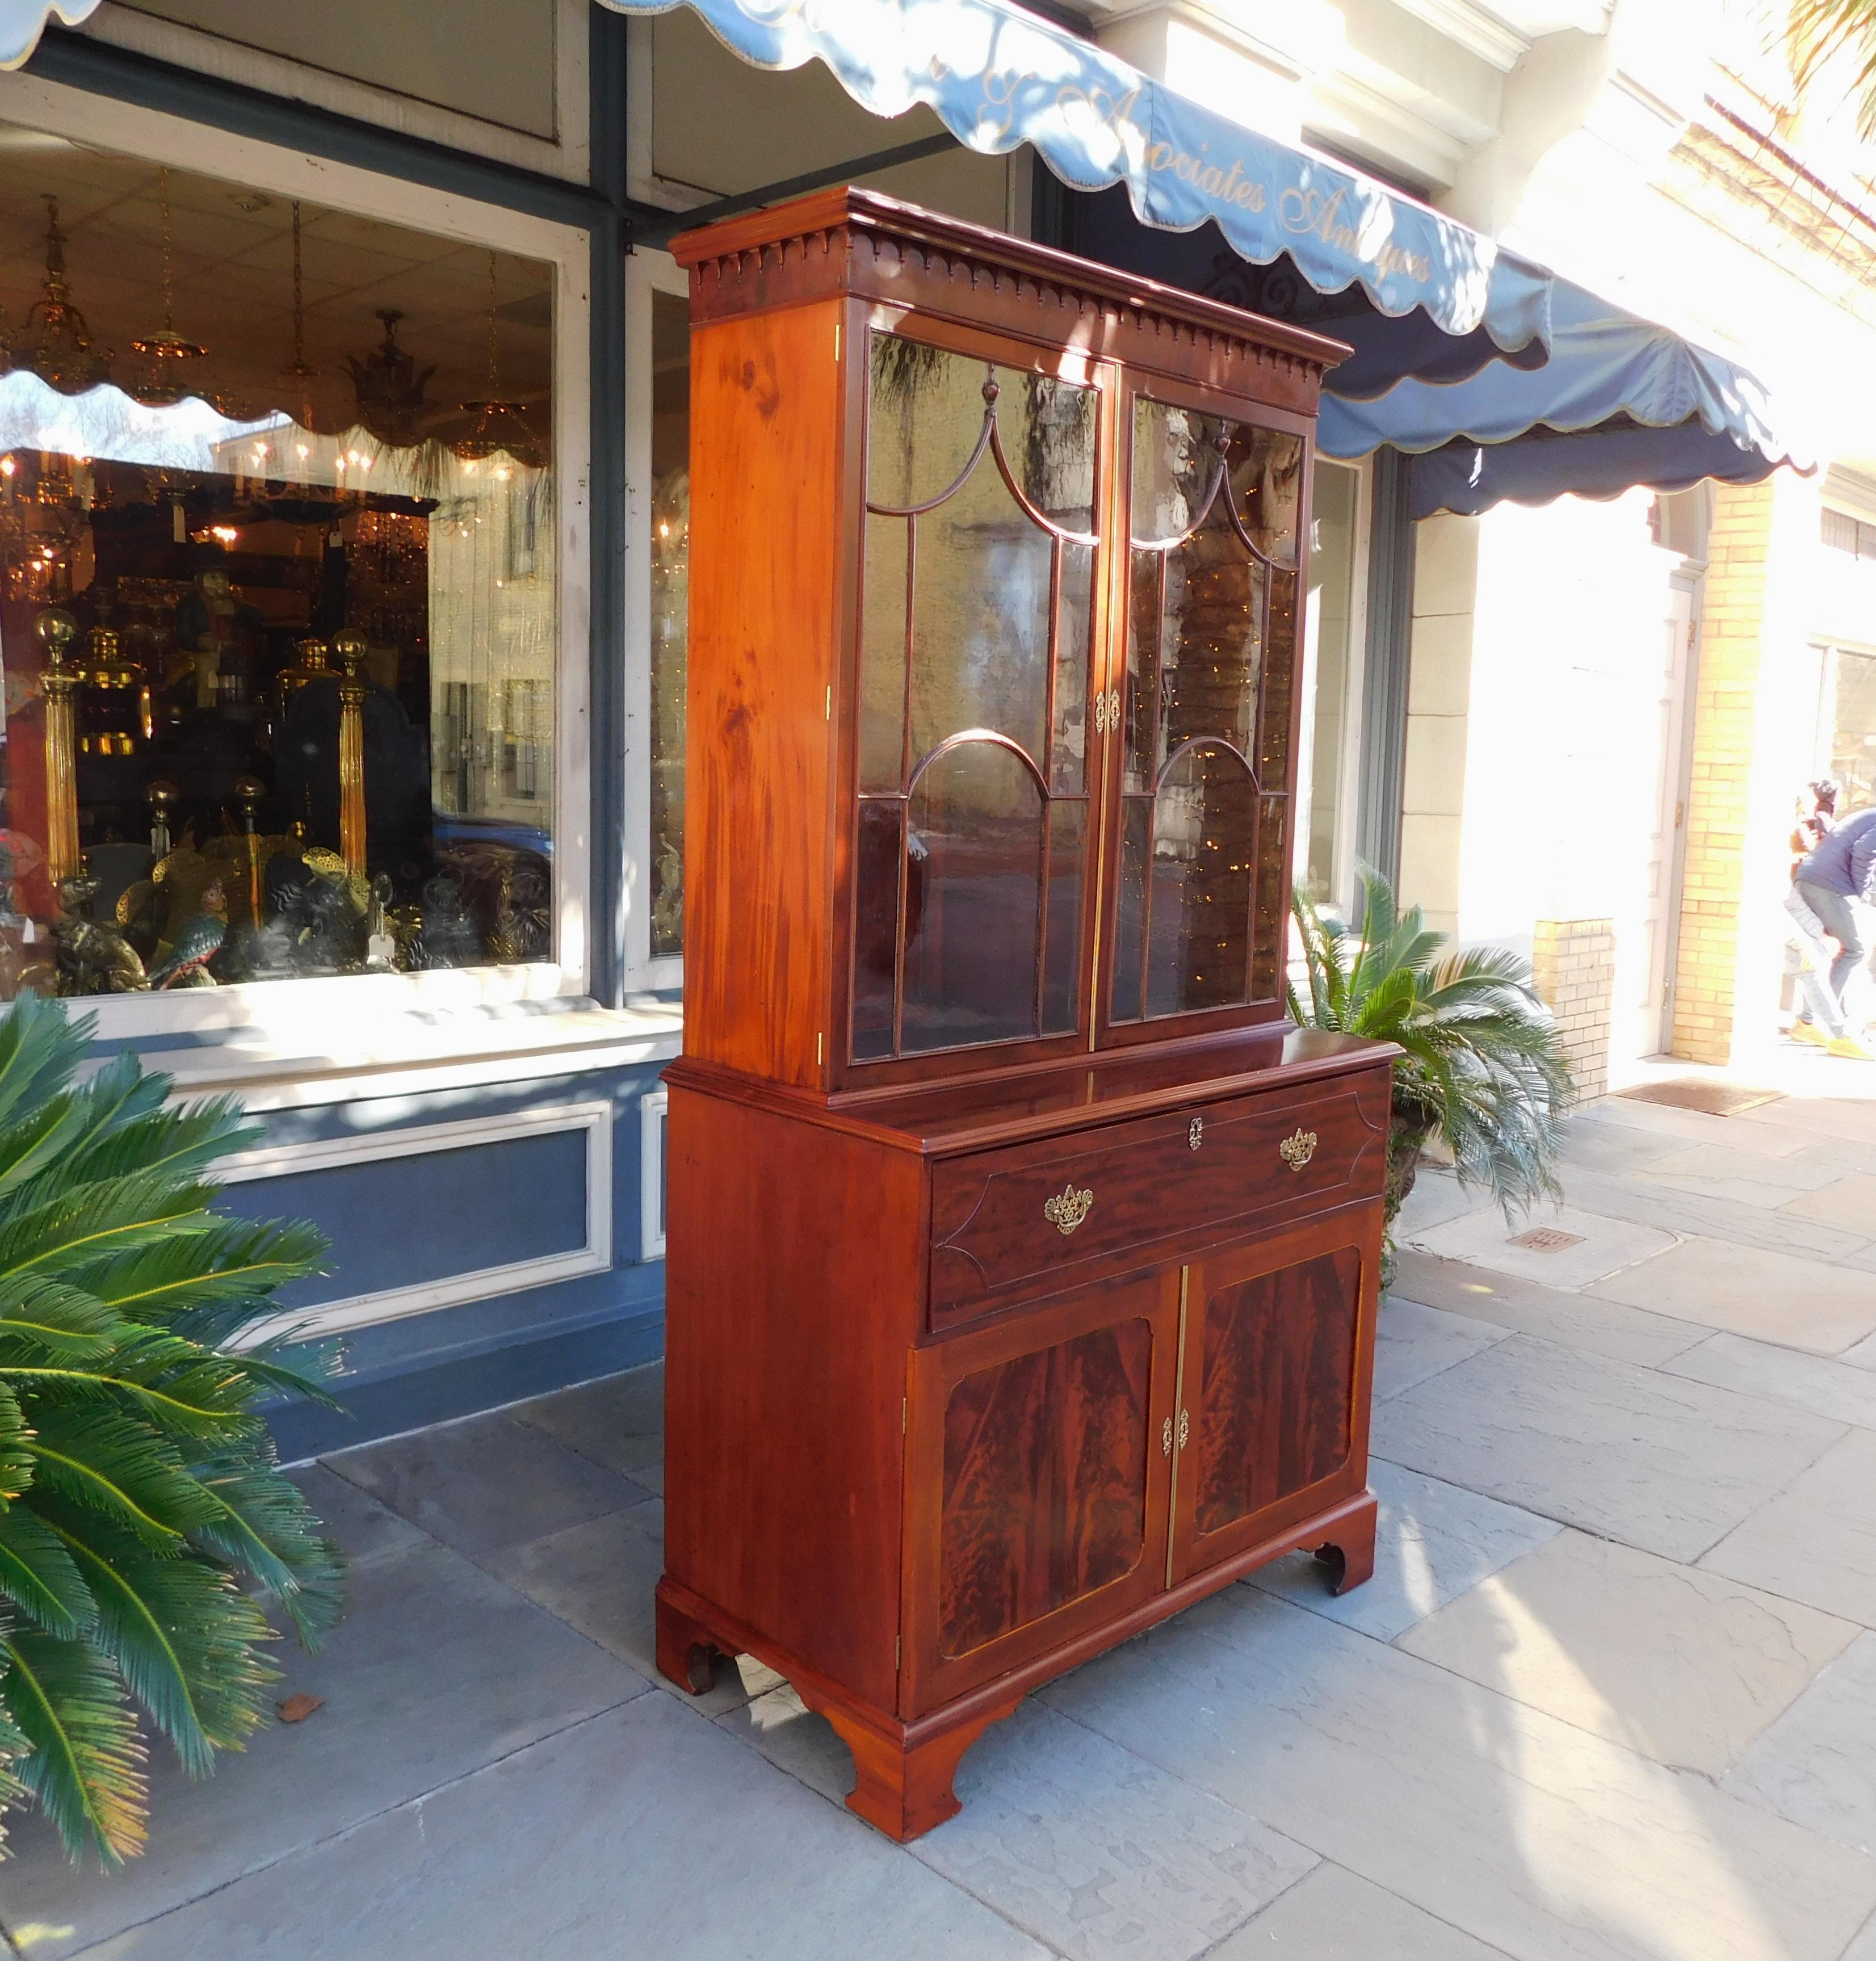 English Chippendale mahogany fall front secretary with carved molded edge finial cornice, flanking upper case hinged glass doors revealing adjustable interior shelves, period brasses, interior locks with keys, fitted interior burl walnut desk,